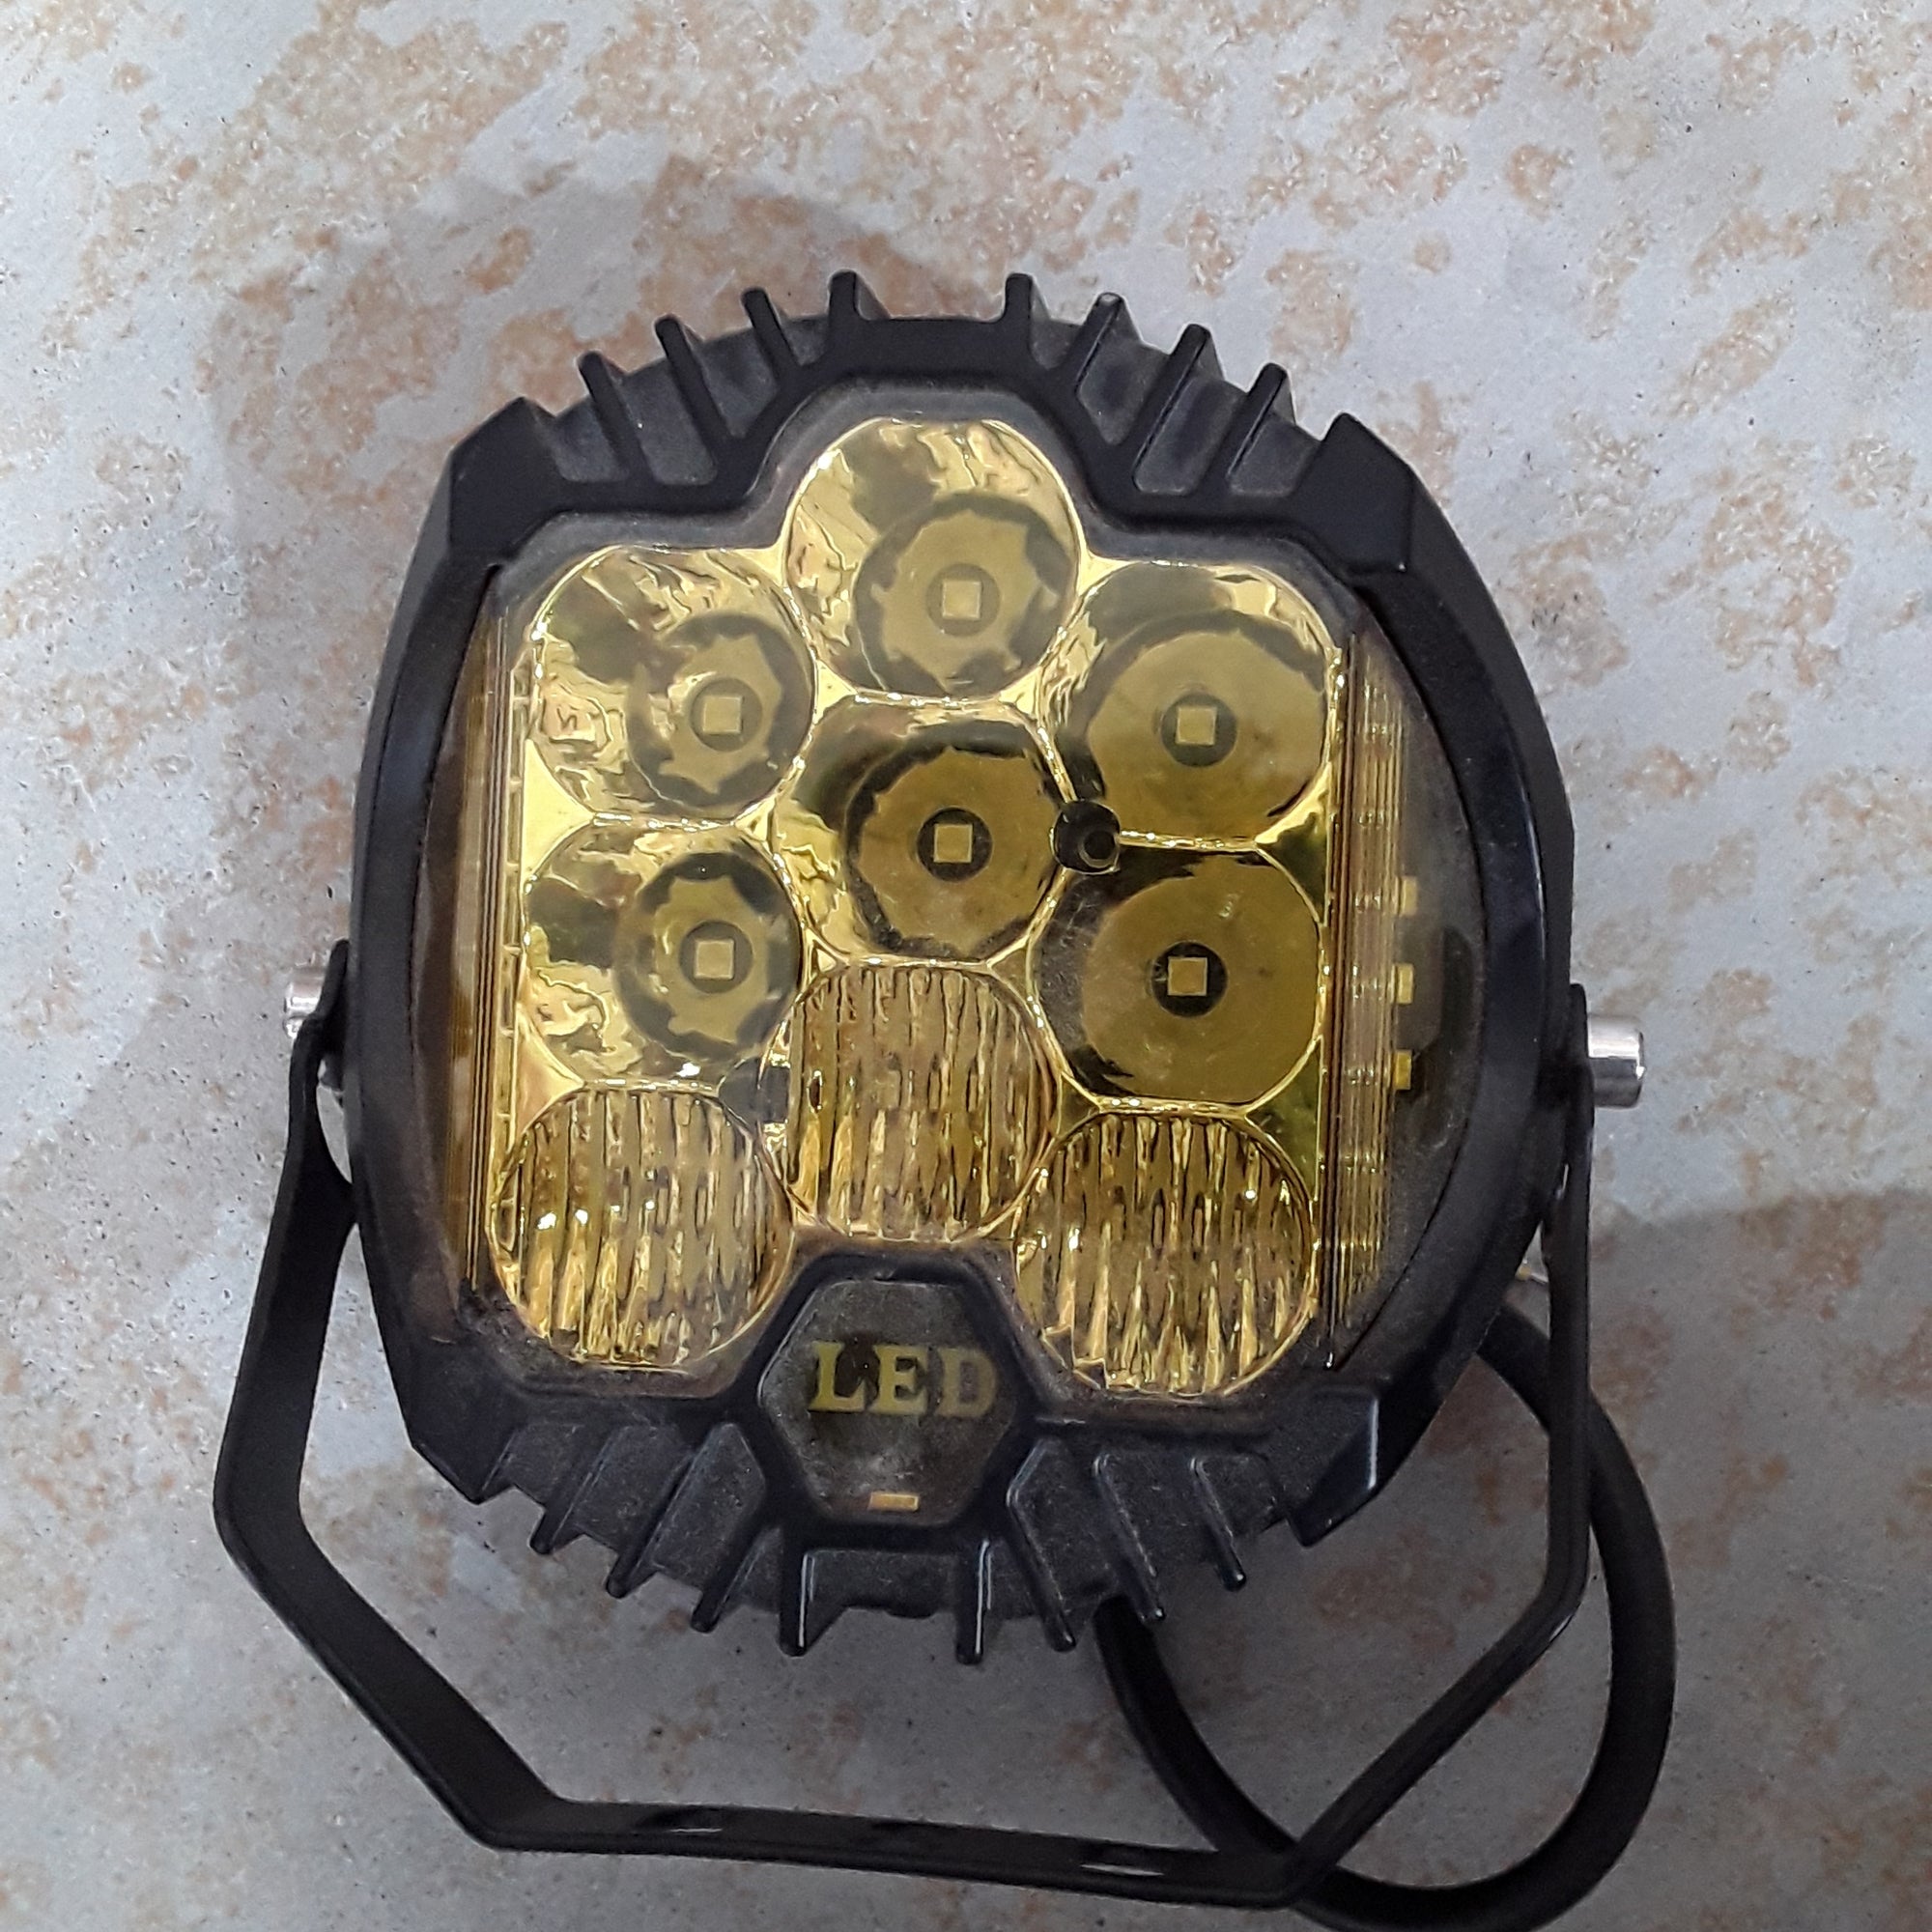 5 inch led spot light with drl yellow set of 2